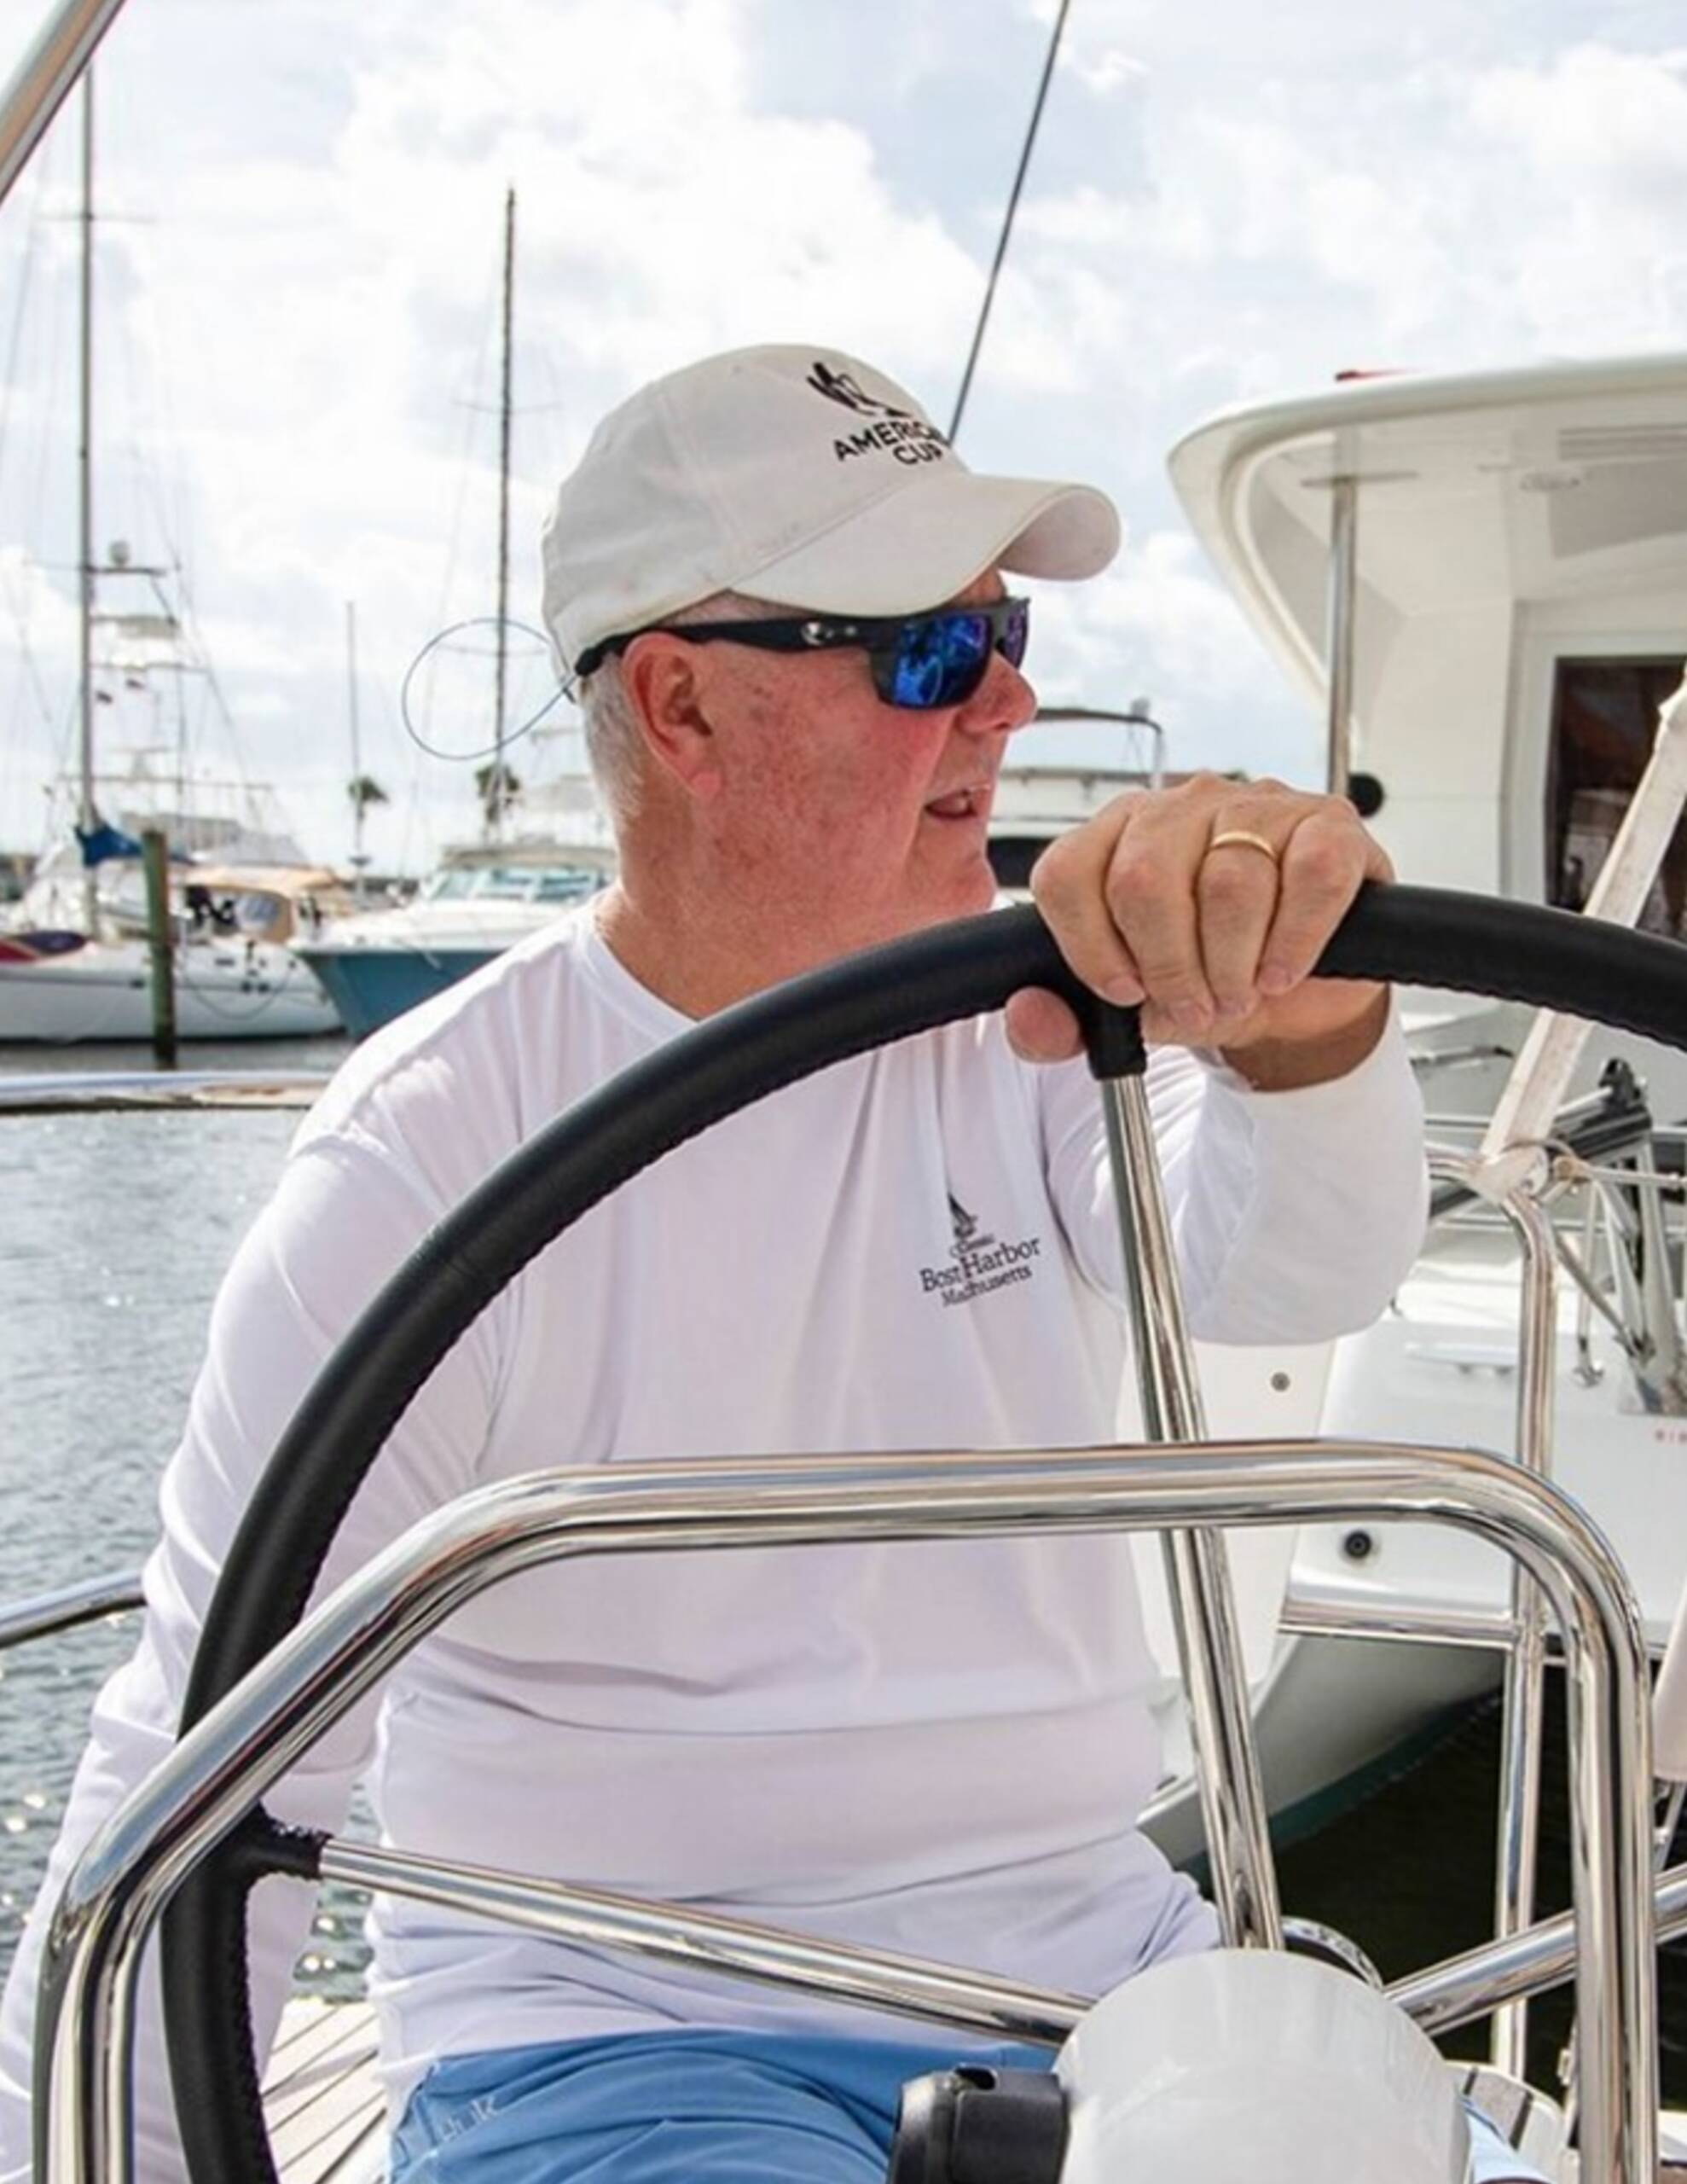 SailTime - Ownership for less, own your own vessel, put your vessel in charter with St Augustine Sailing, your boat is ready when you are, we do all the work and you have all the fun, family sailing, things to do in St Augustine, things to do in orlando, things to do in jacksonville